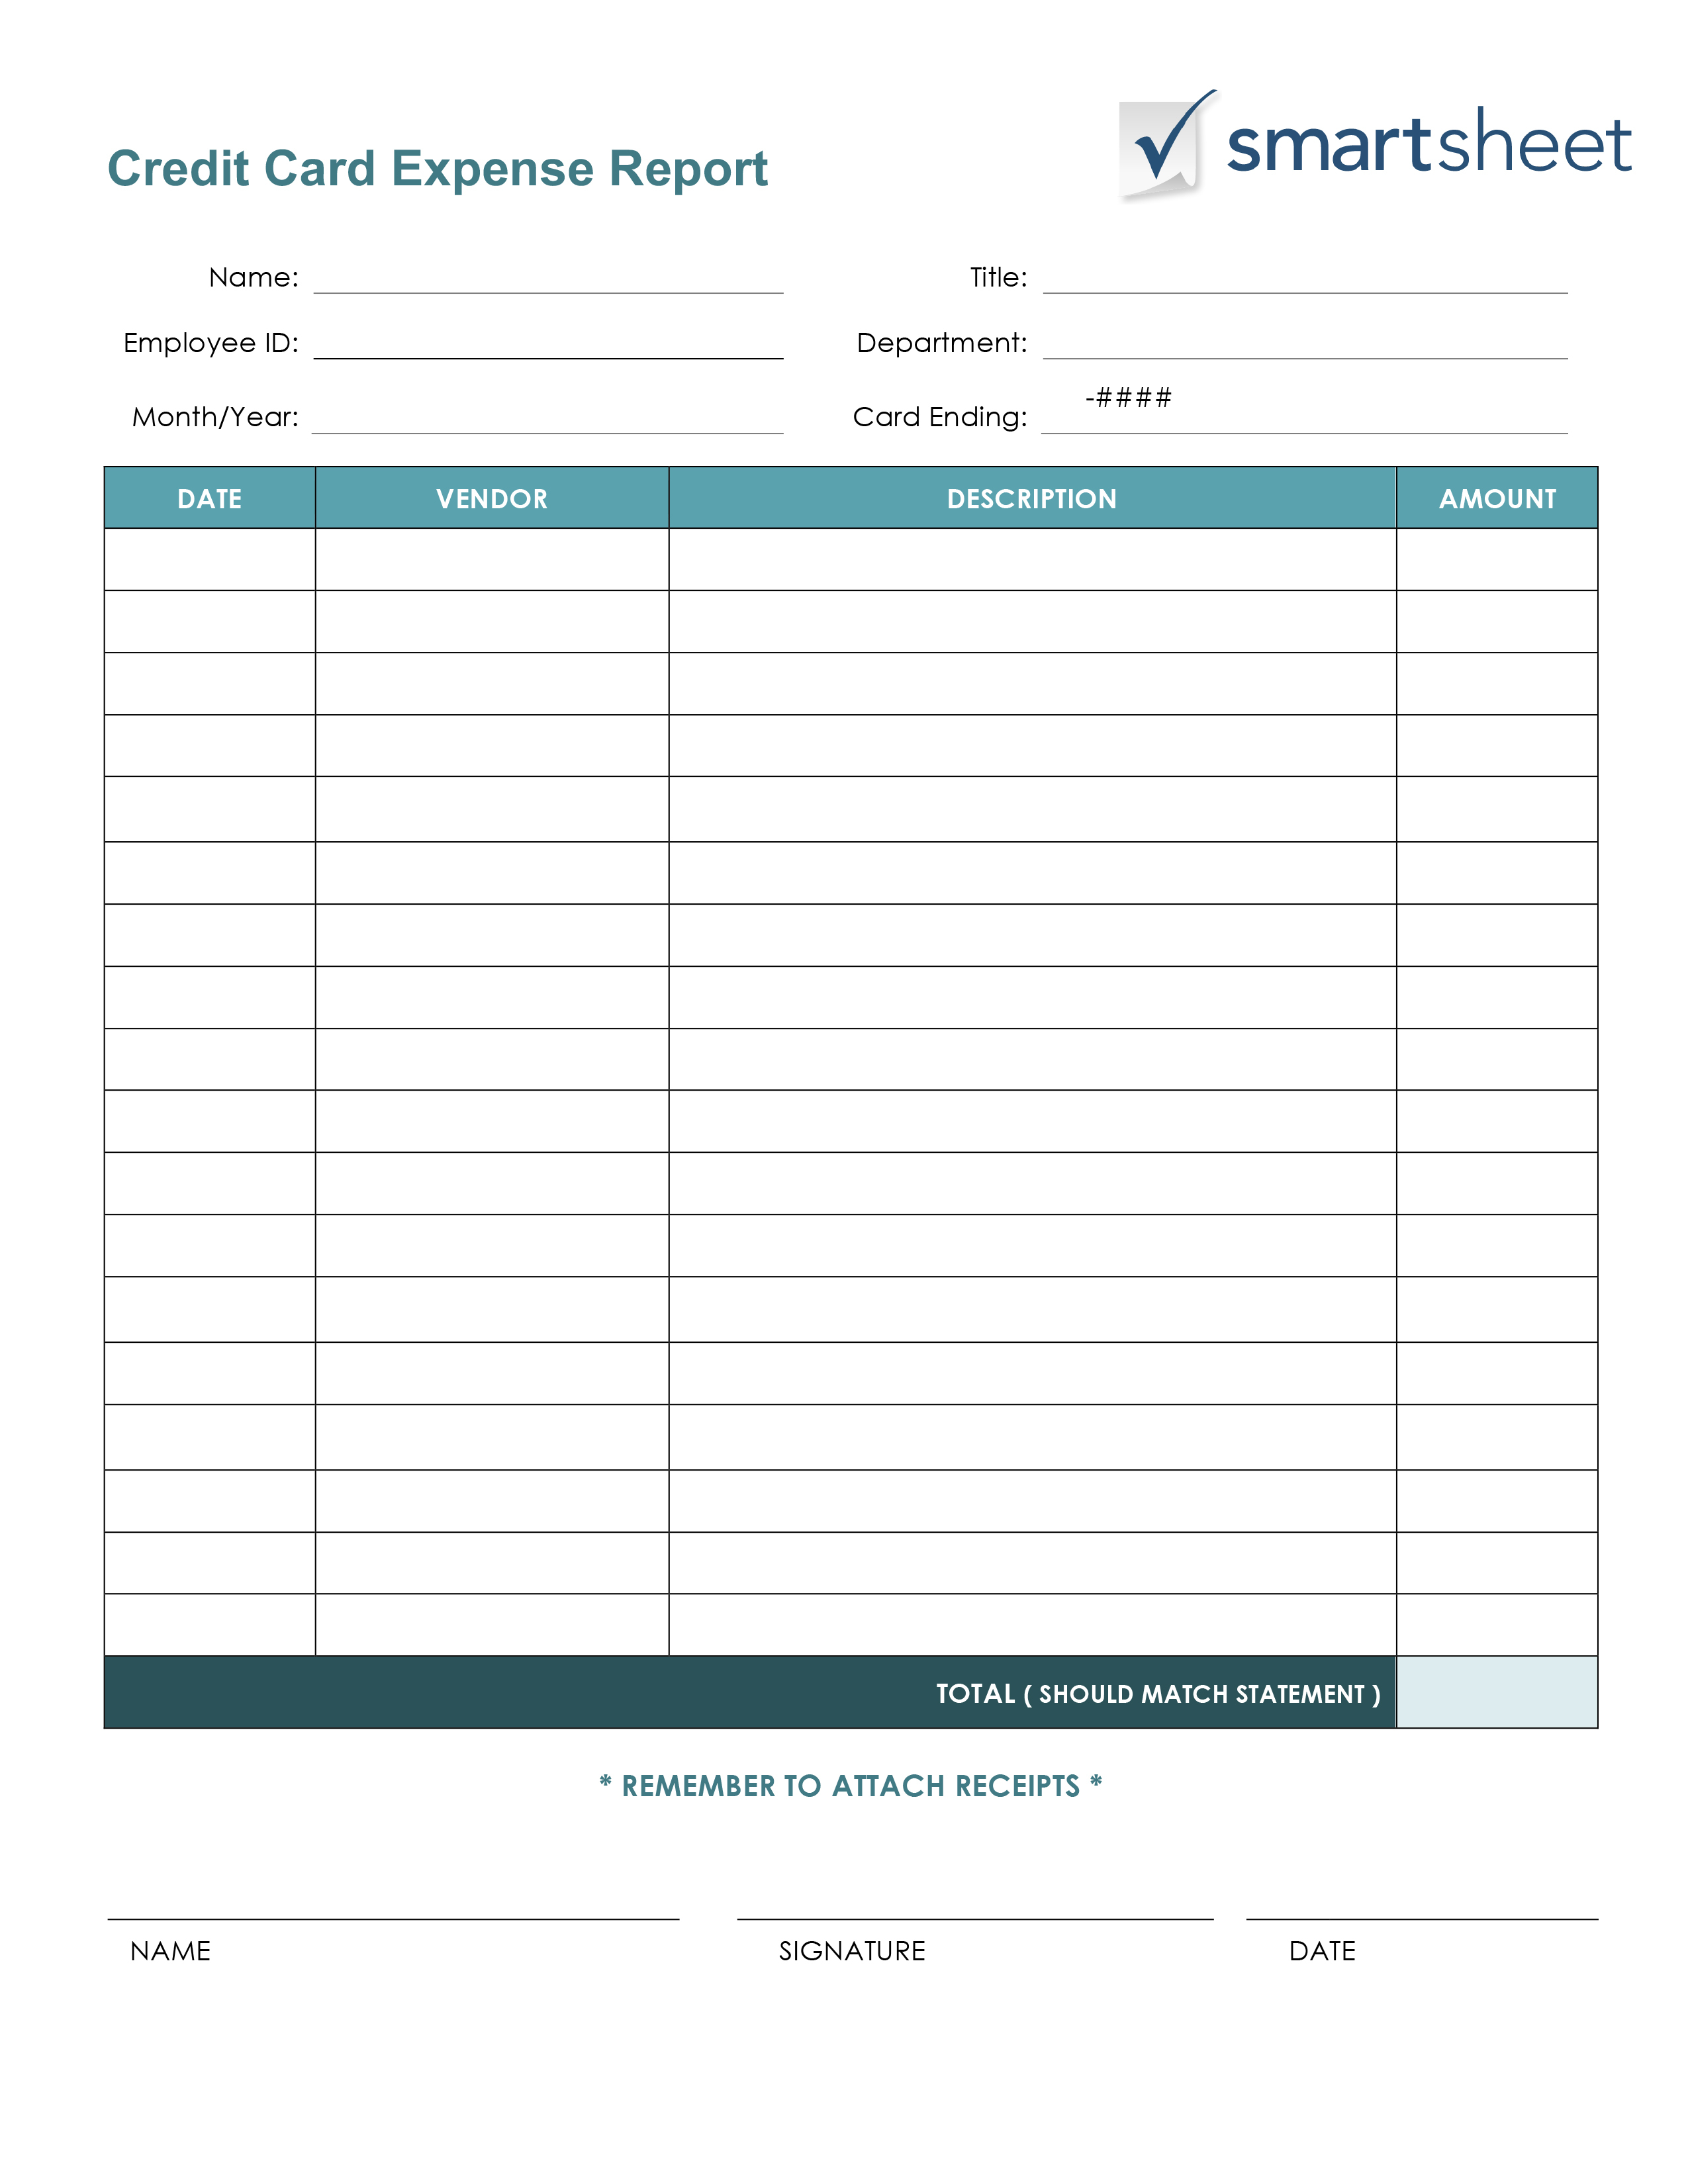 Free Expense Report Templates Smartsheet To Monthly Business Expense Spreadsheet